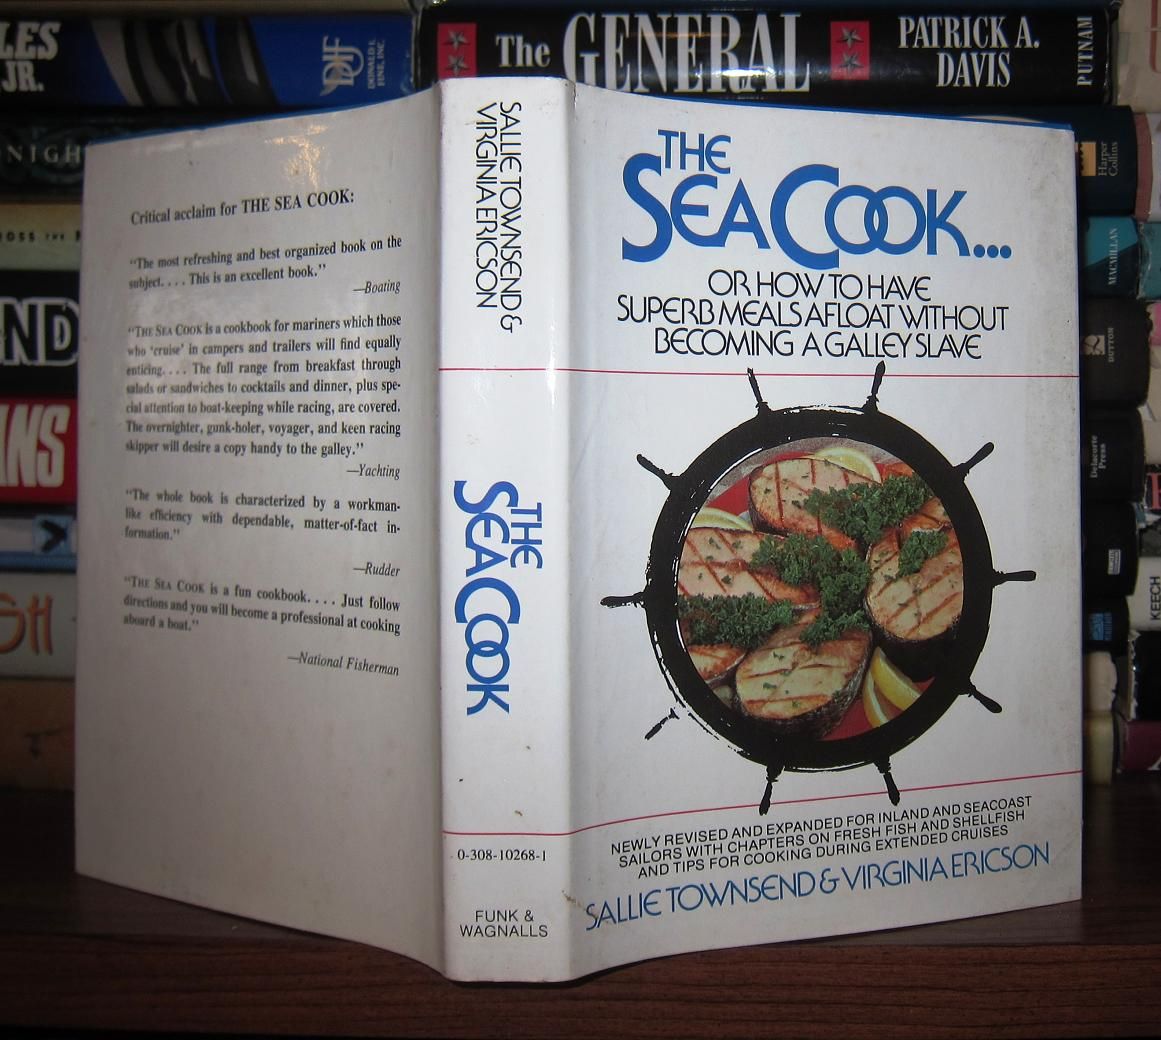 TOWNSEND, SALLIE & ERICSON, VIRGINIA - The Sea Cook or How to Have Superb Meals Afloat without Becoming a Galley Slave